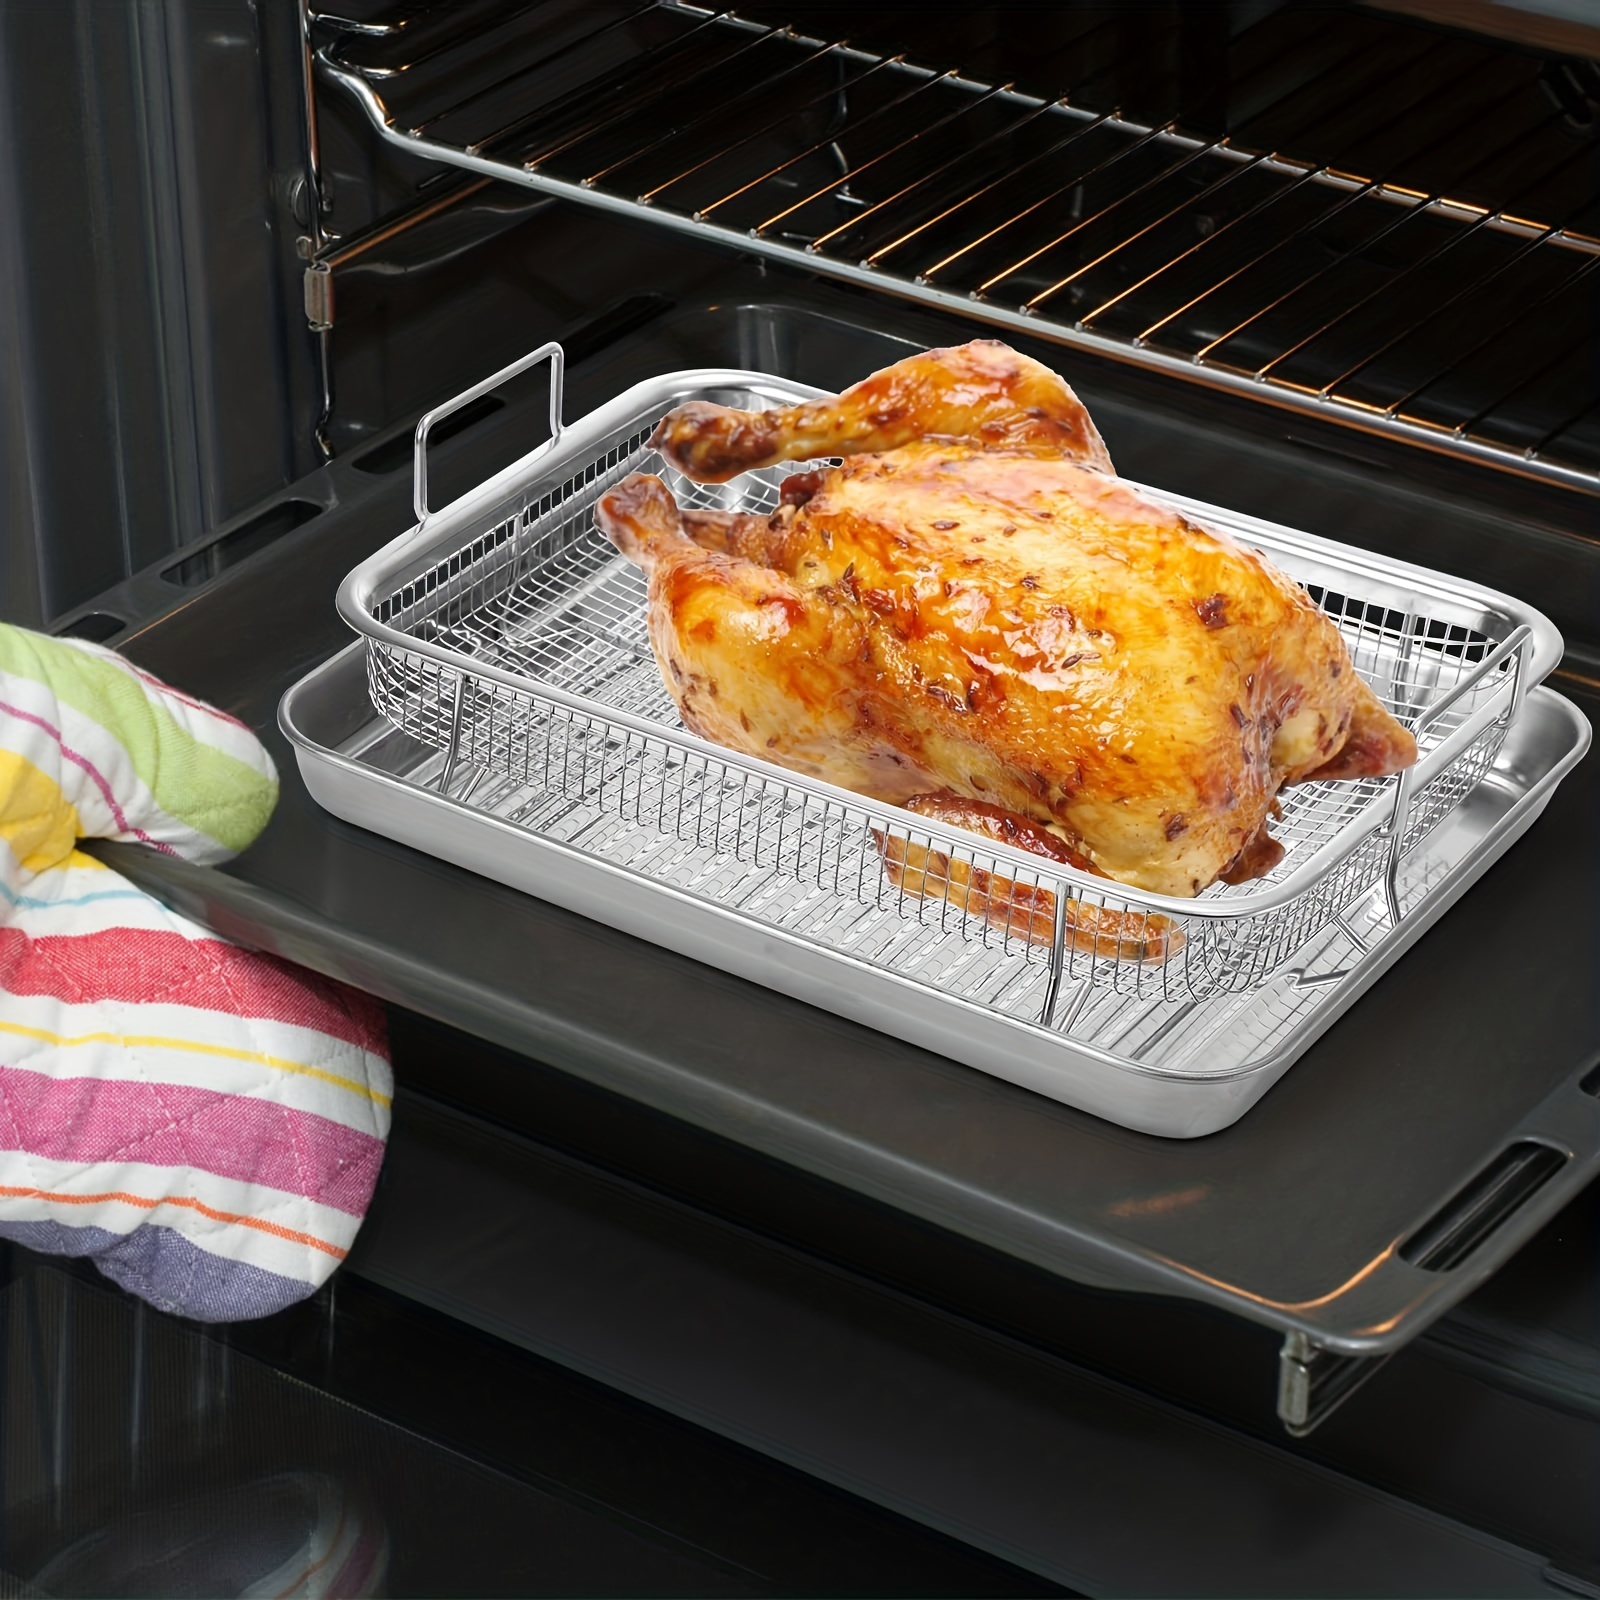 Oven Grill Pan With Rack